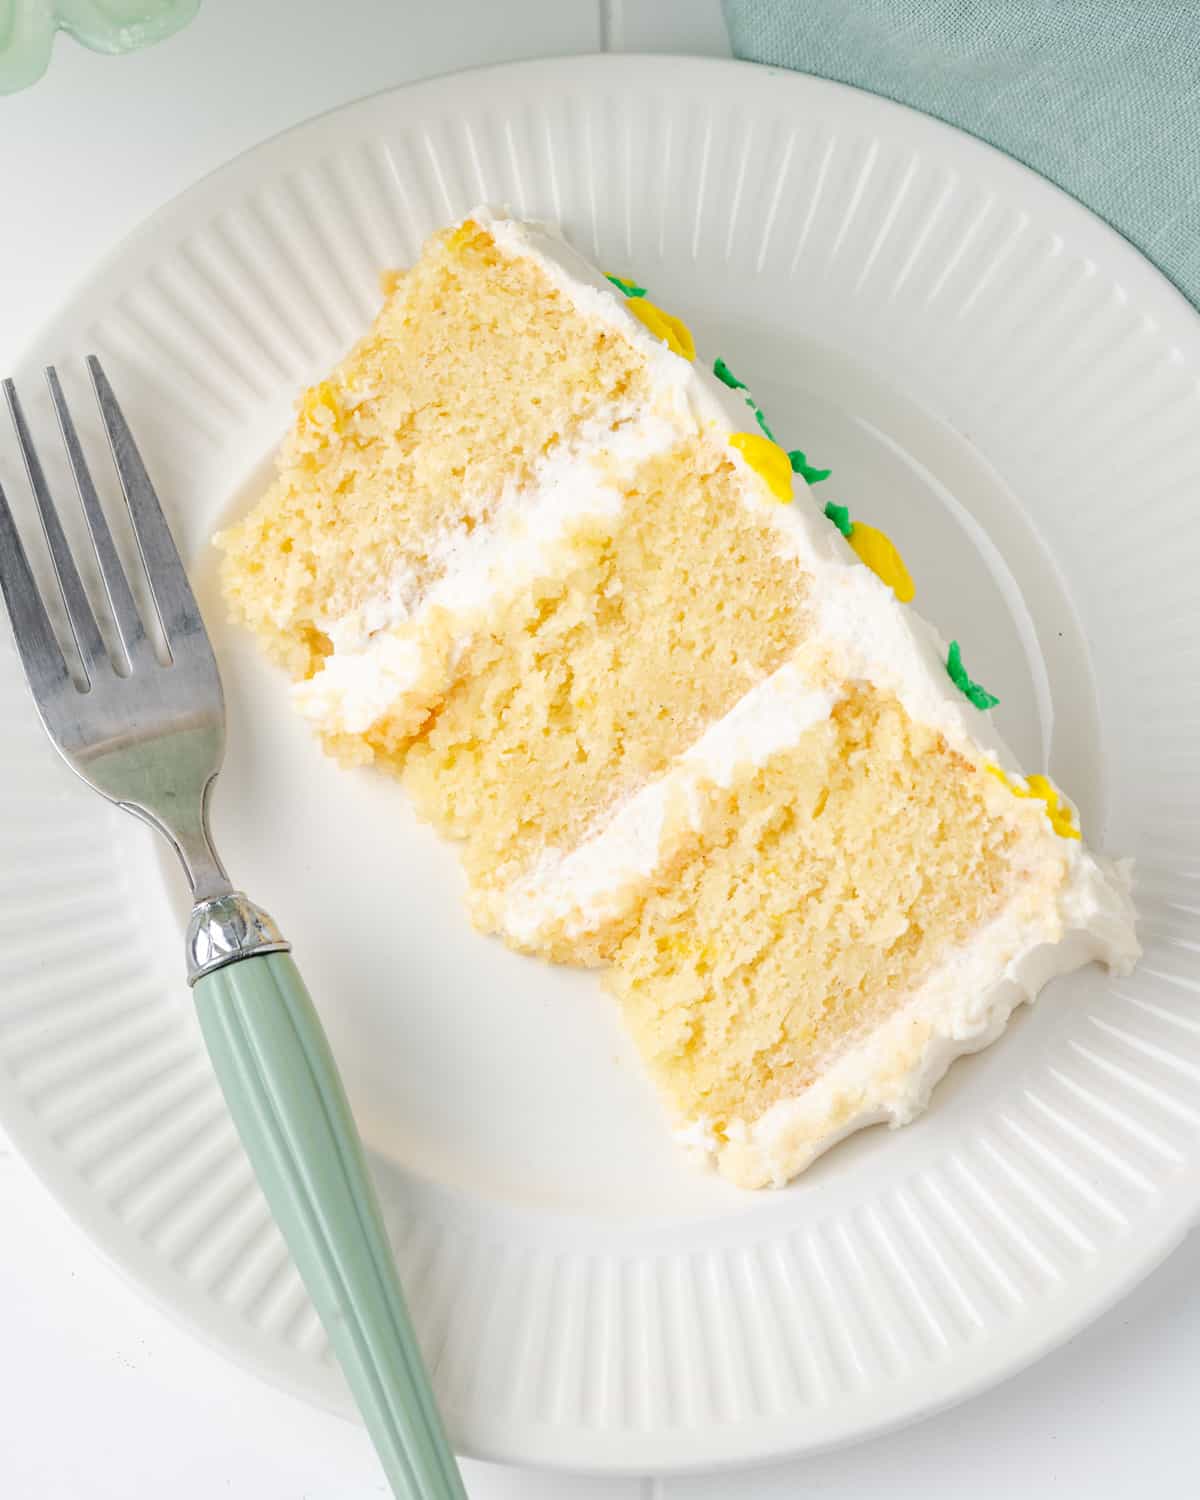 A slice of gluten free lemon cake served on a white plate.